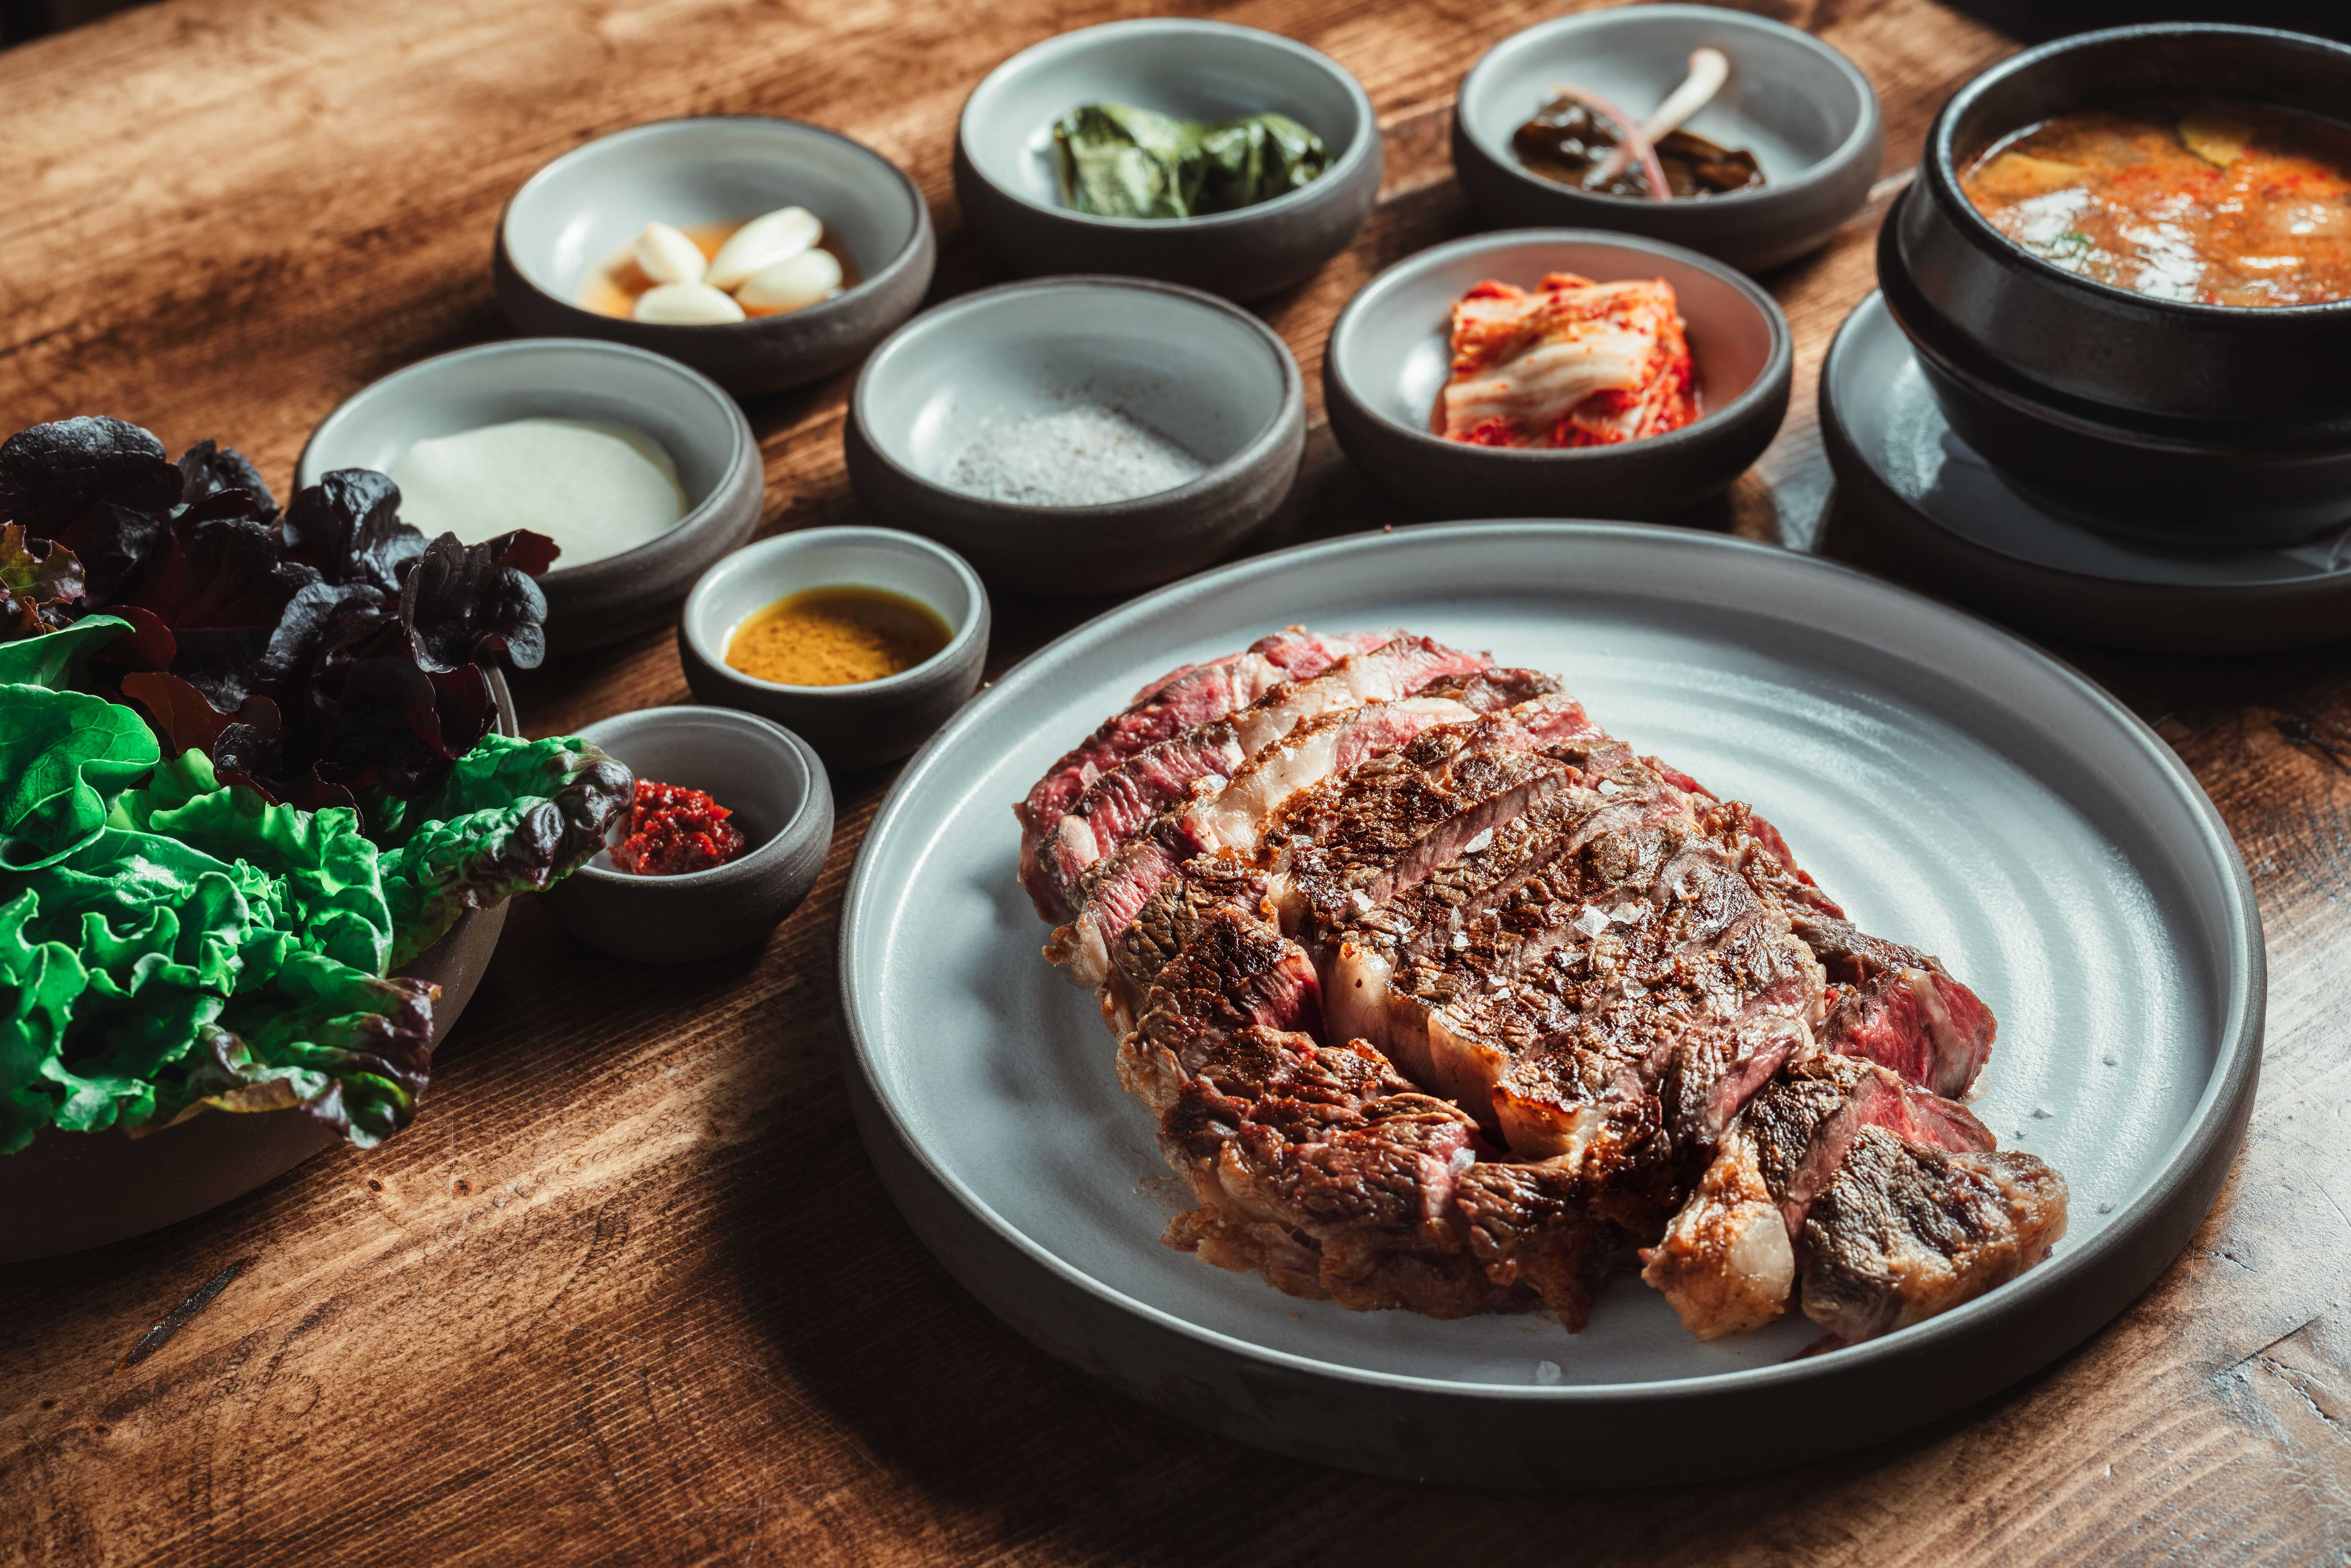 A sliced rare ribeye is on a gray plate on a wooden table. Small plates of Korean-style side dishes are visible in the background.